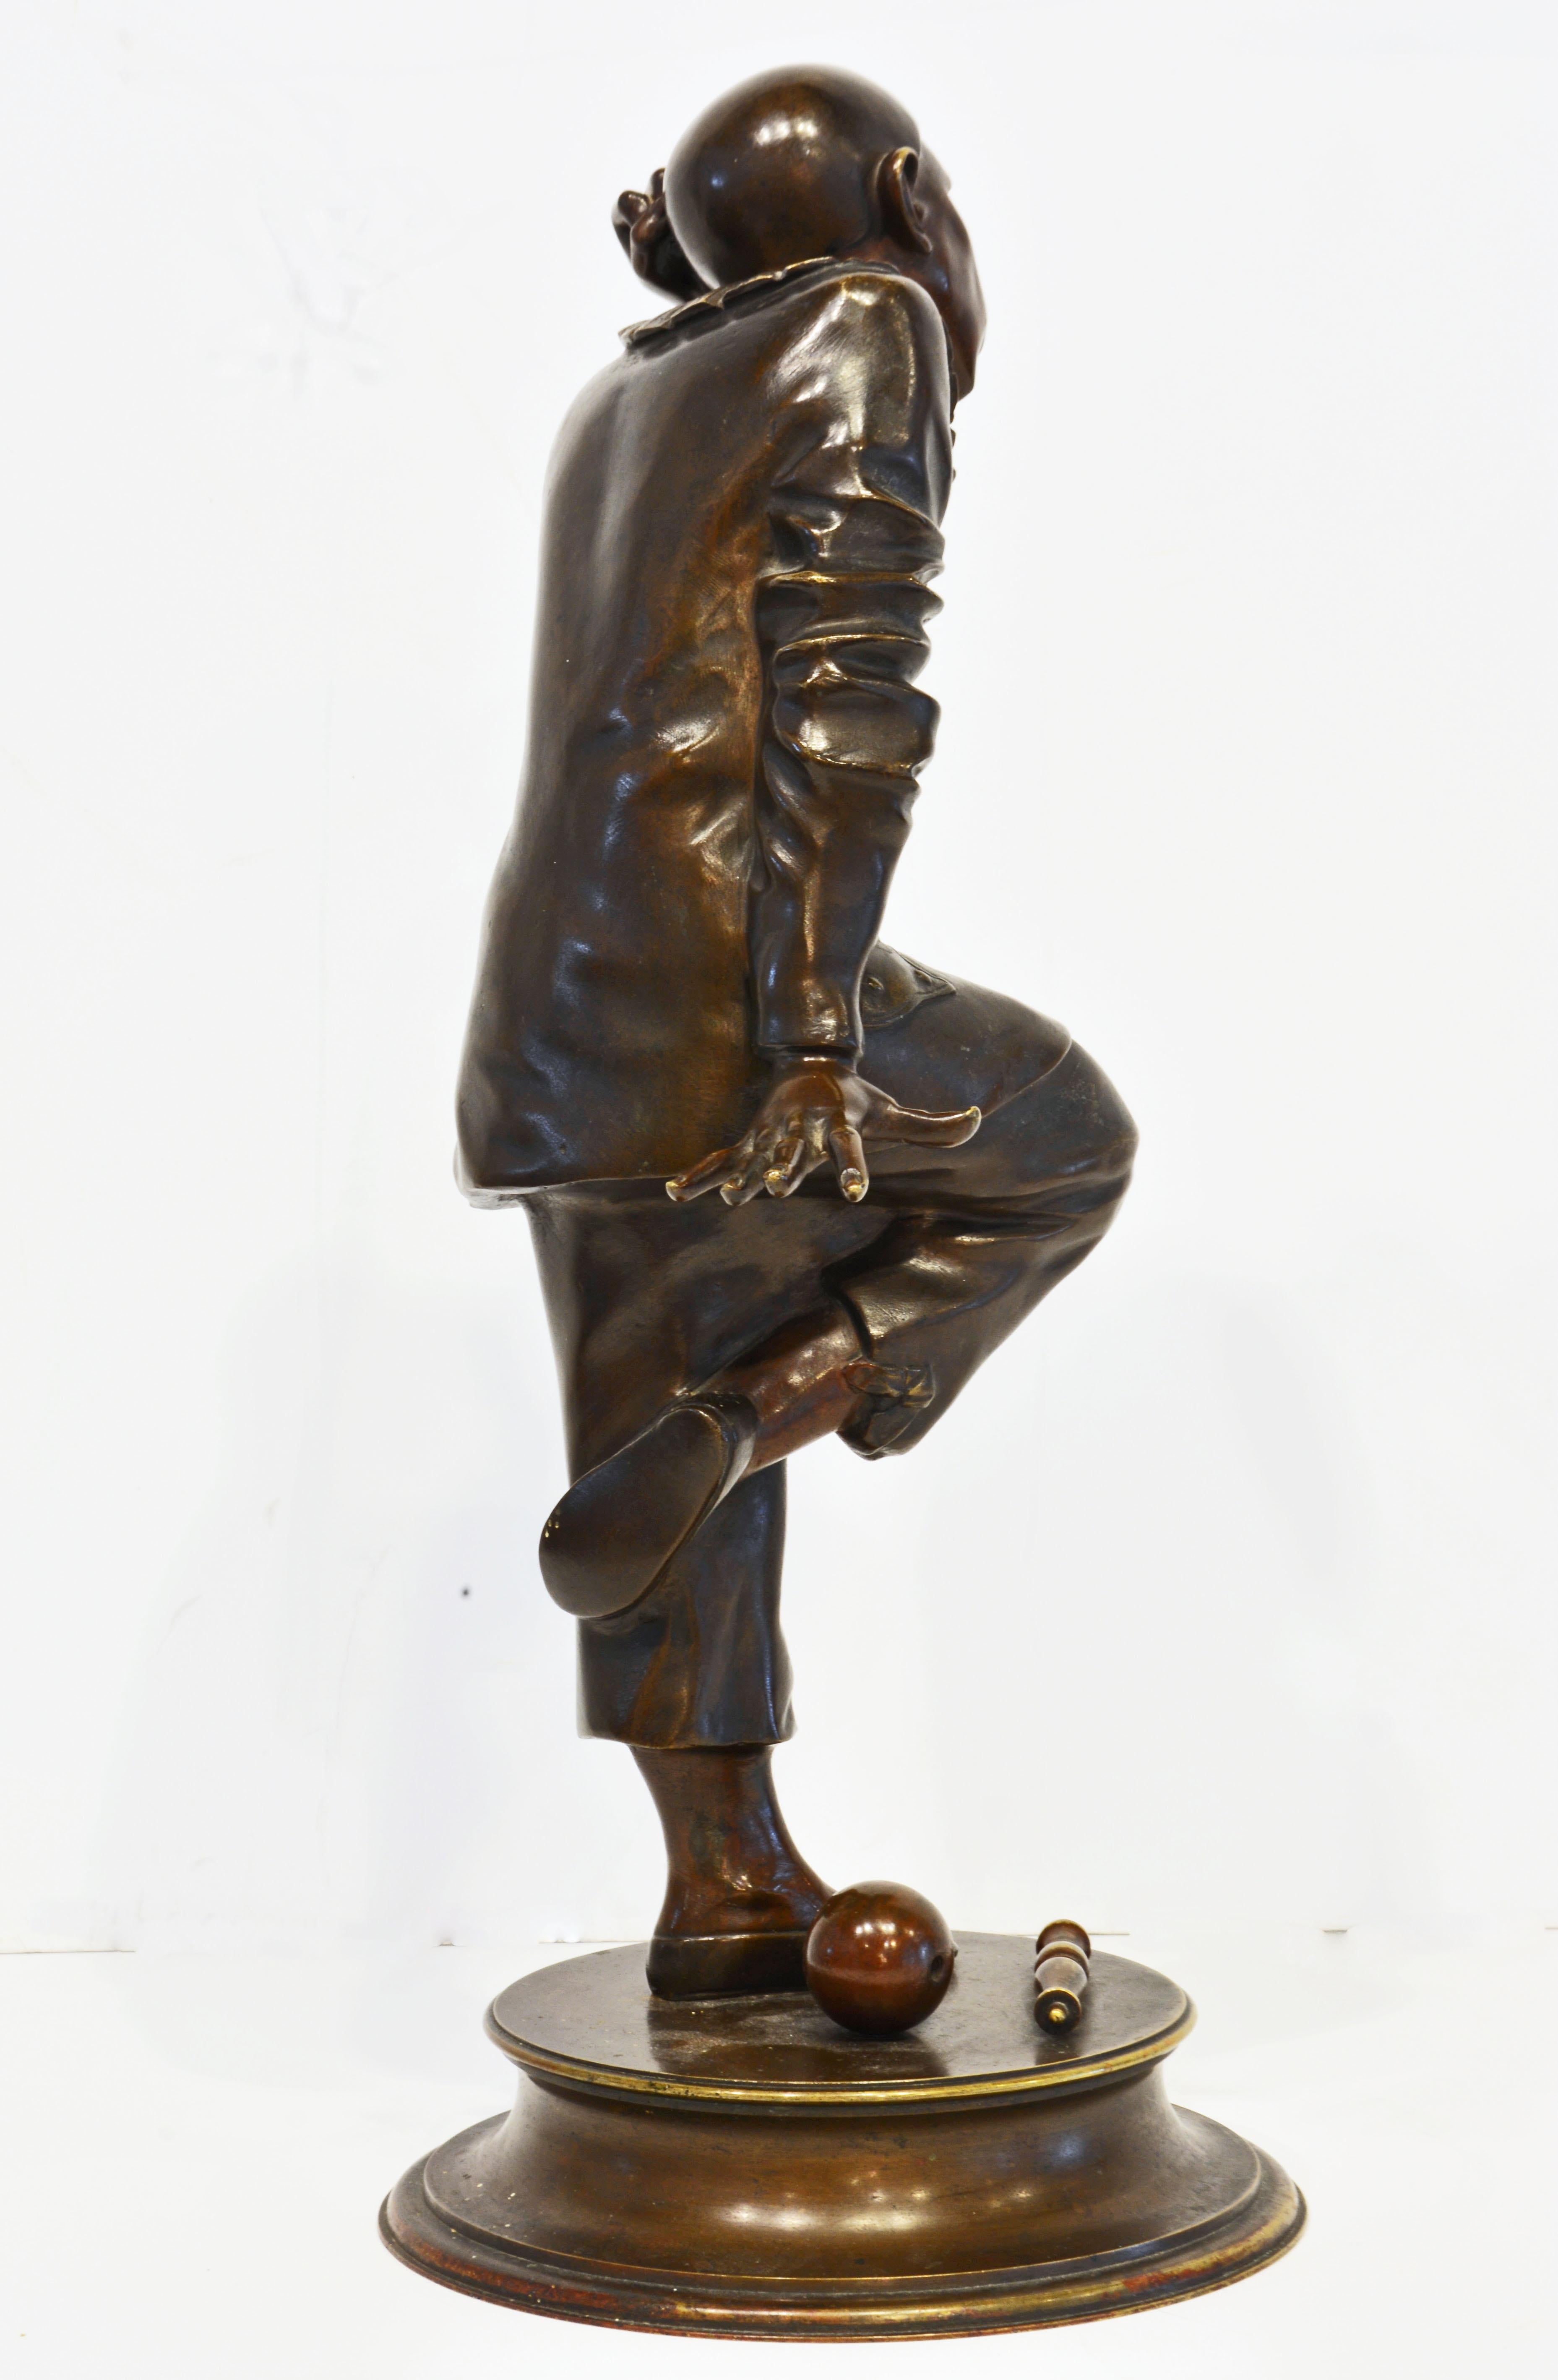 Patinated Bronze Sculpture of a Posing Jester or Harlequin by French Sculptor G. Gueyton